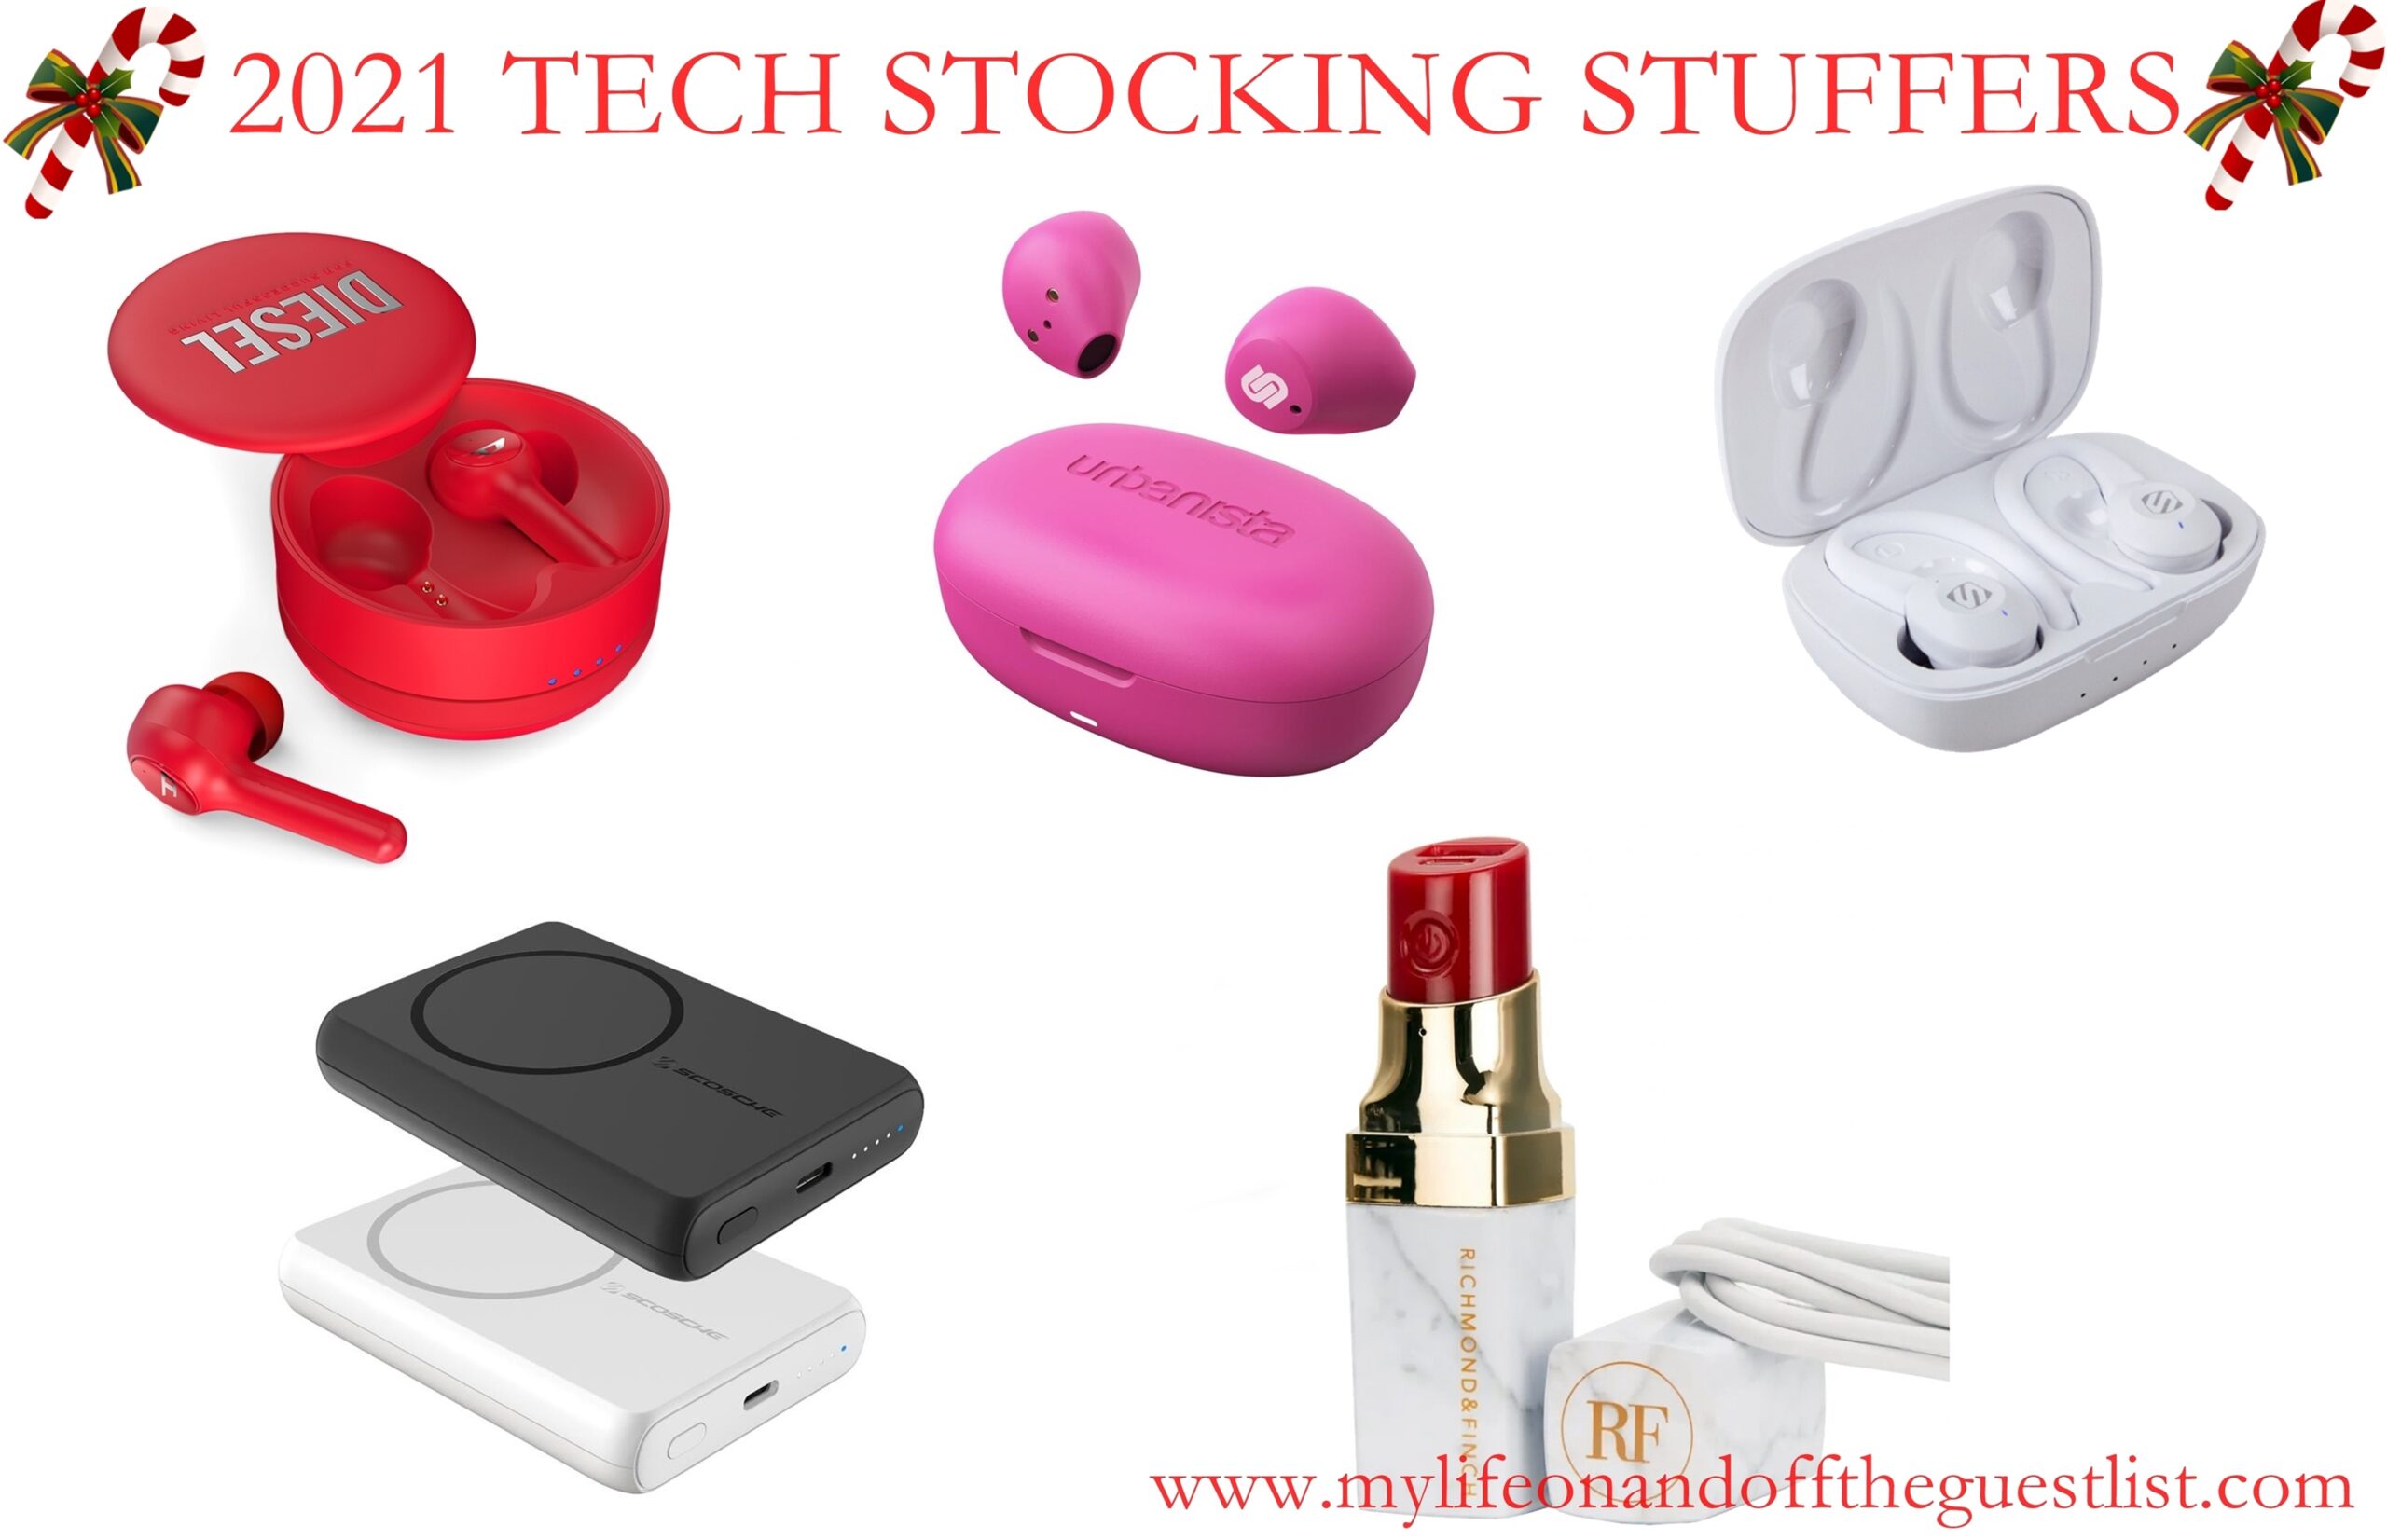 Holiday Gift Guide: Stocking Stuffers! Small Gifts That Make a Big Impact